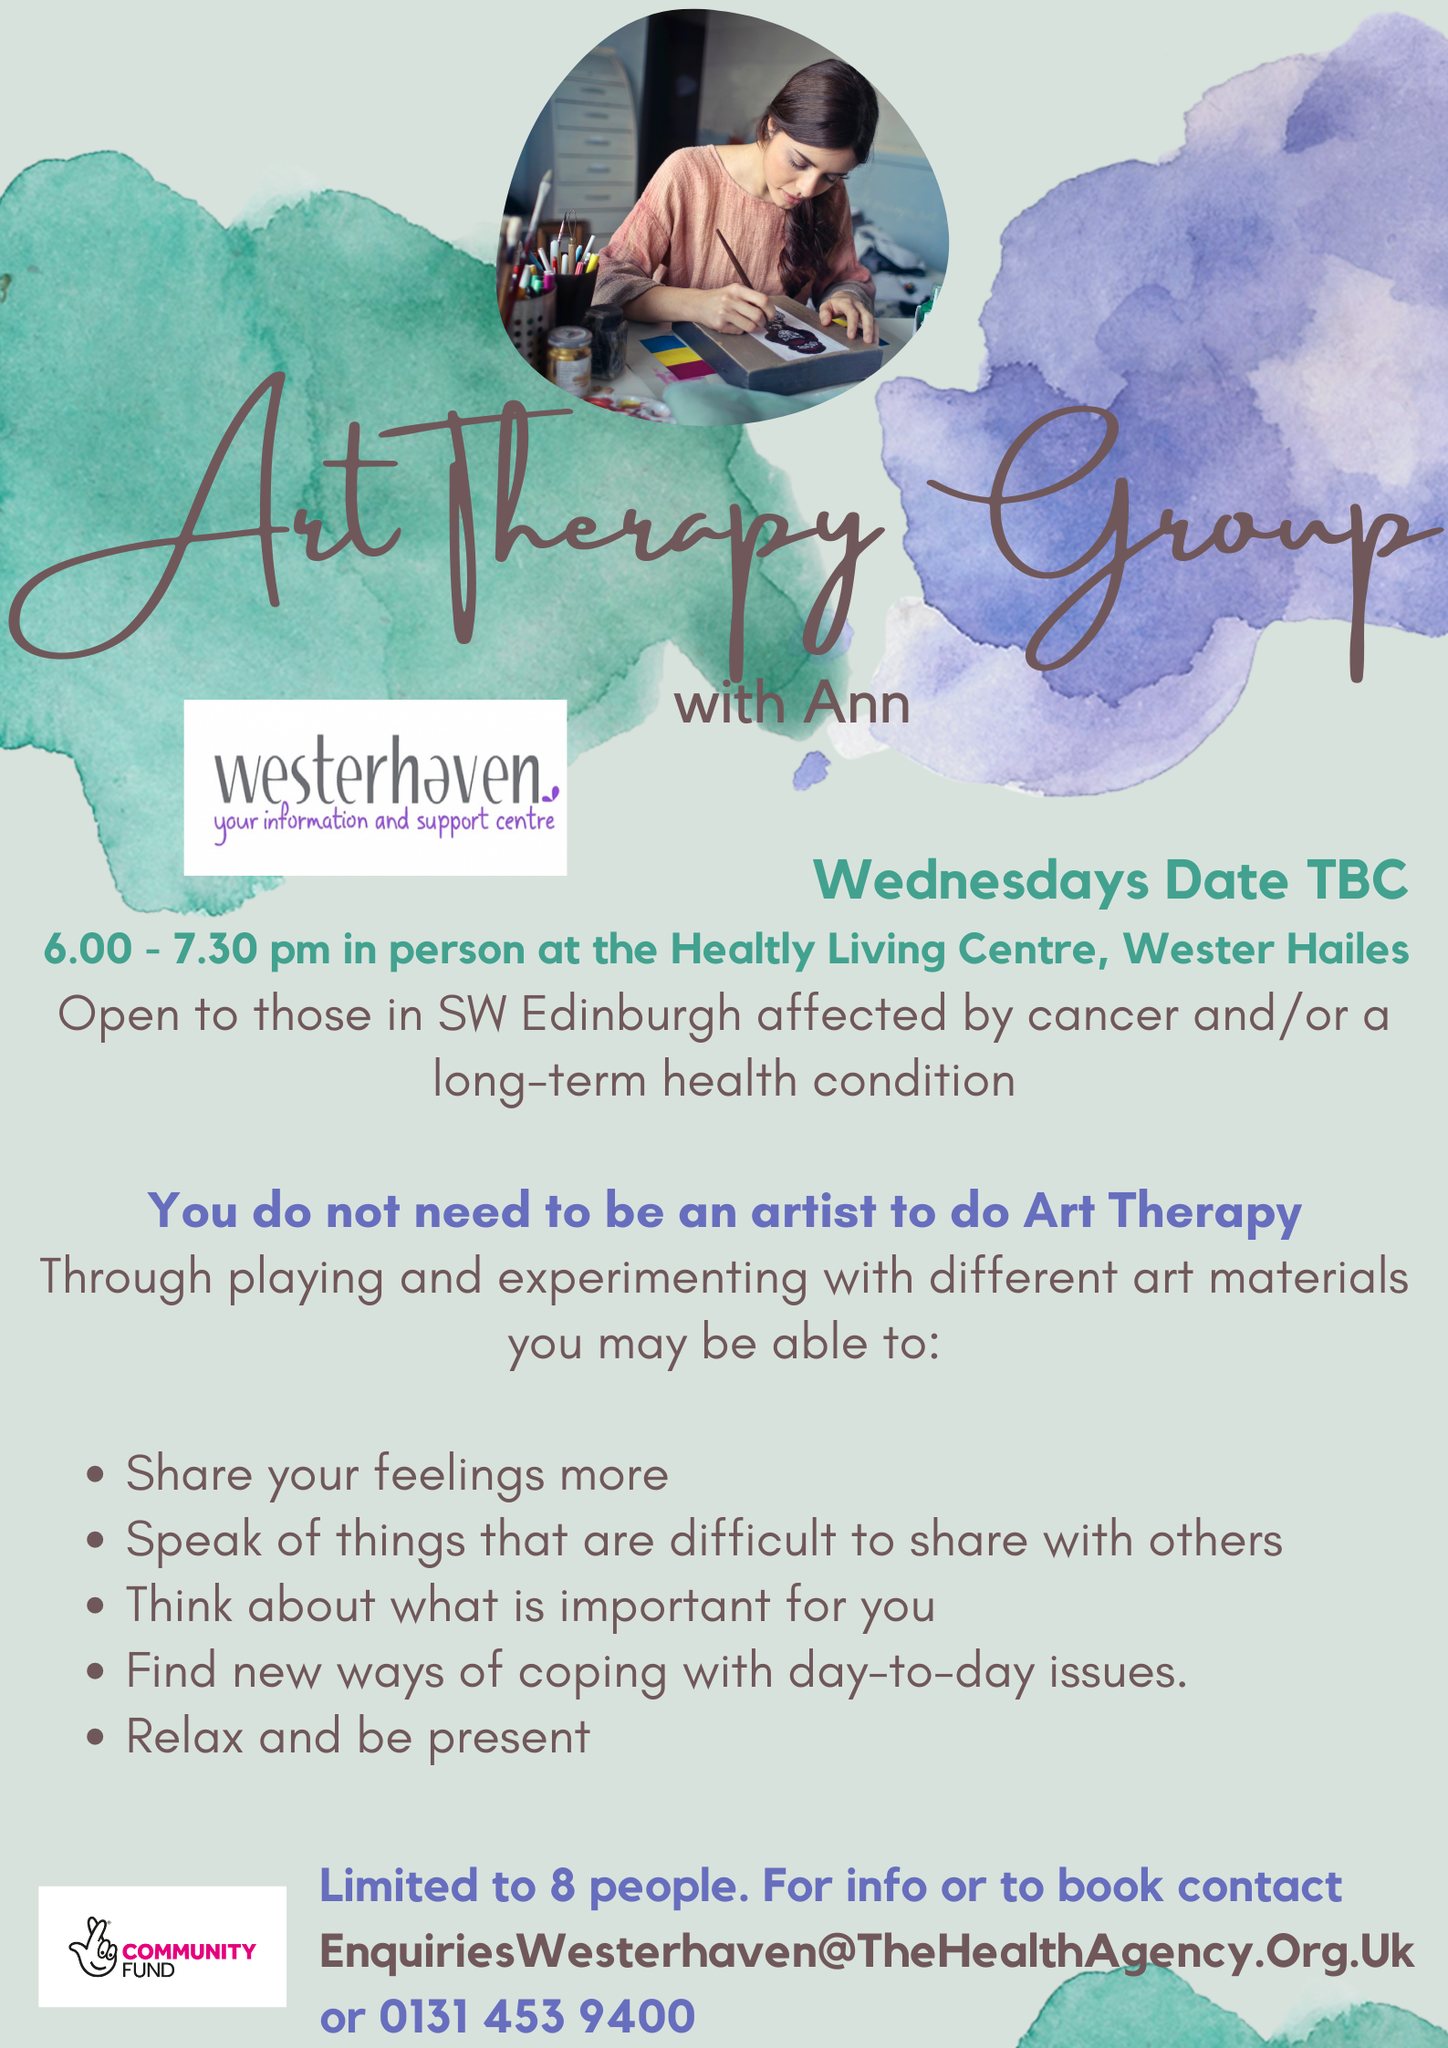 wester haven art therapy Featured Image